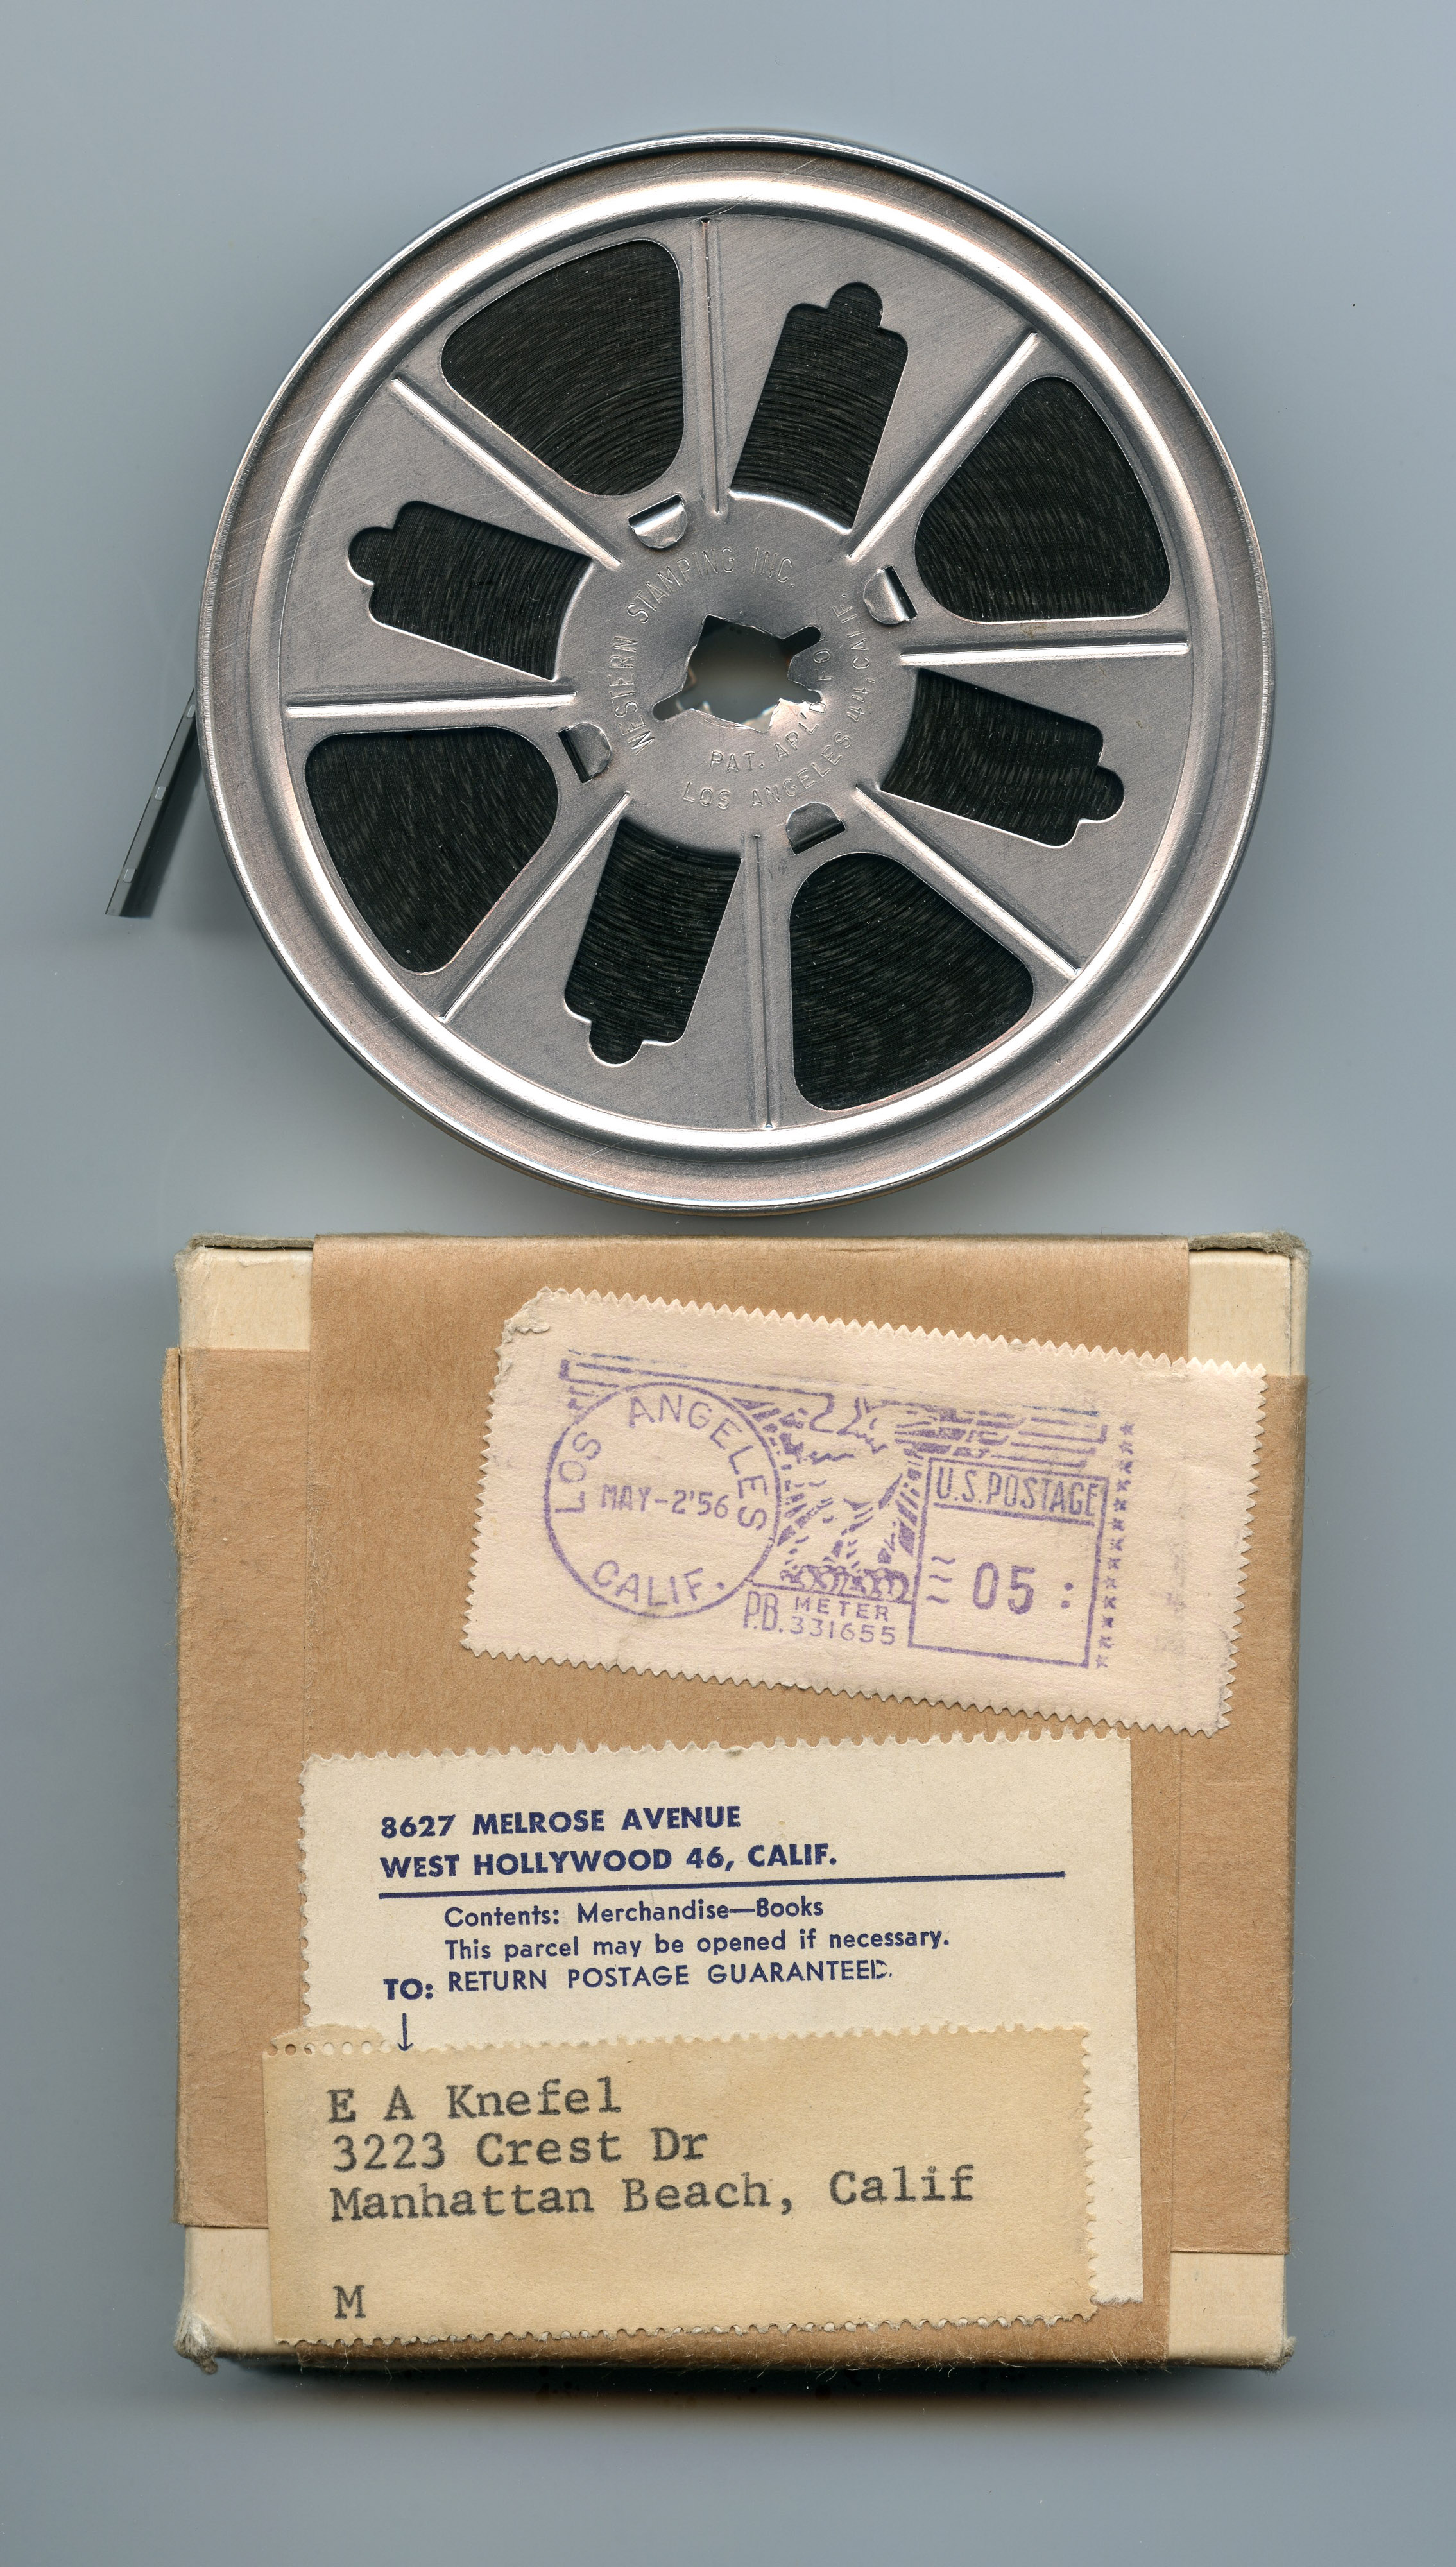 File:Small Gauge Film Reel & Can Archive D.D. Teoli Jr. A.C. (9).jpg -  Wikimedia Commons